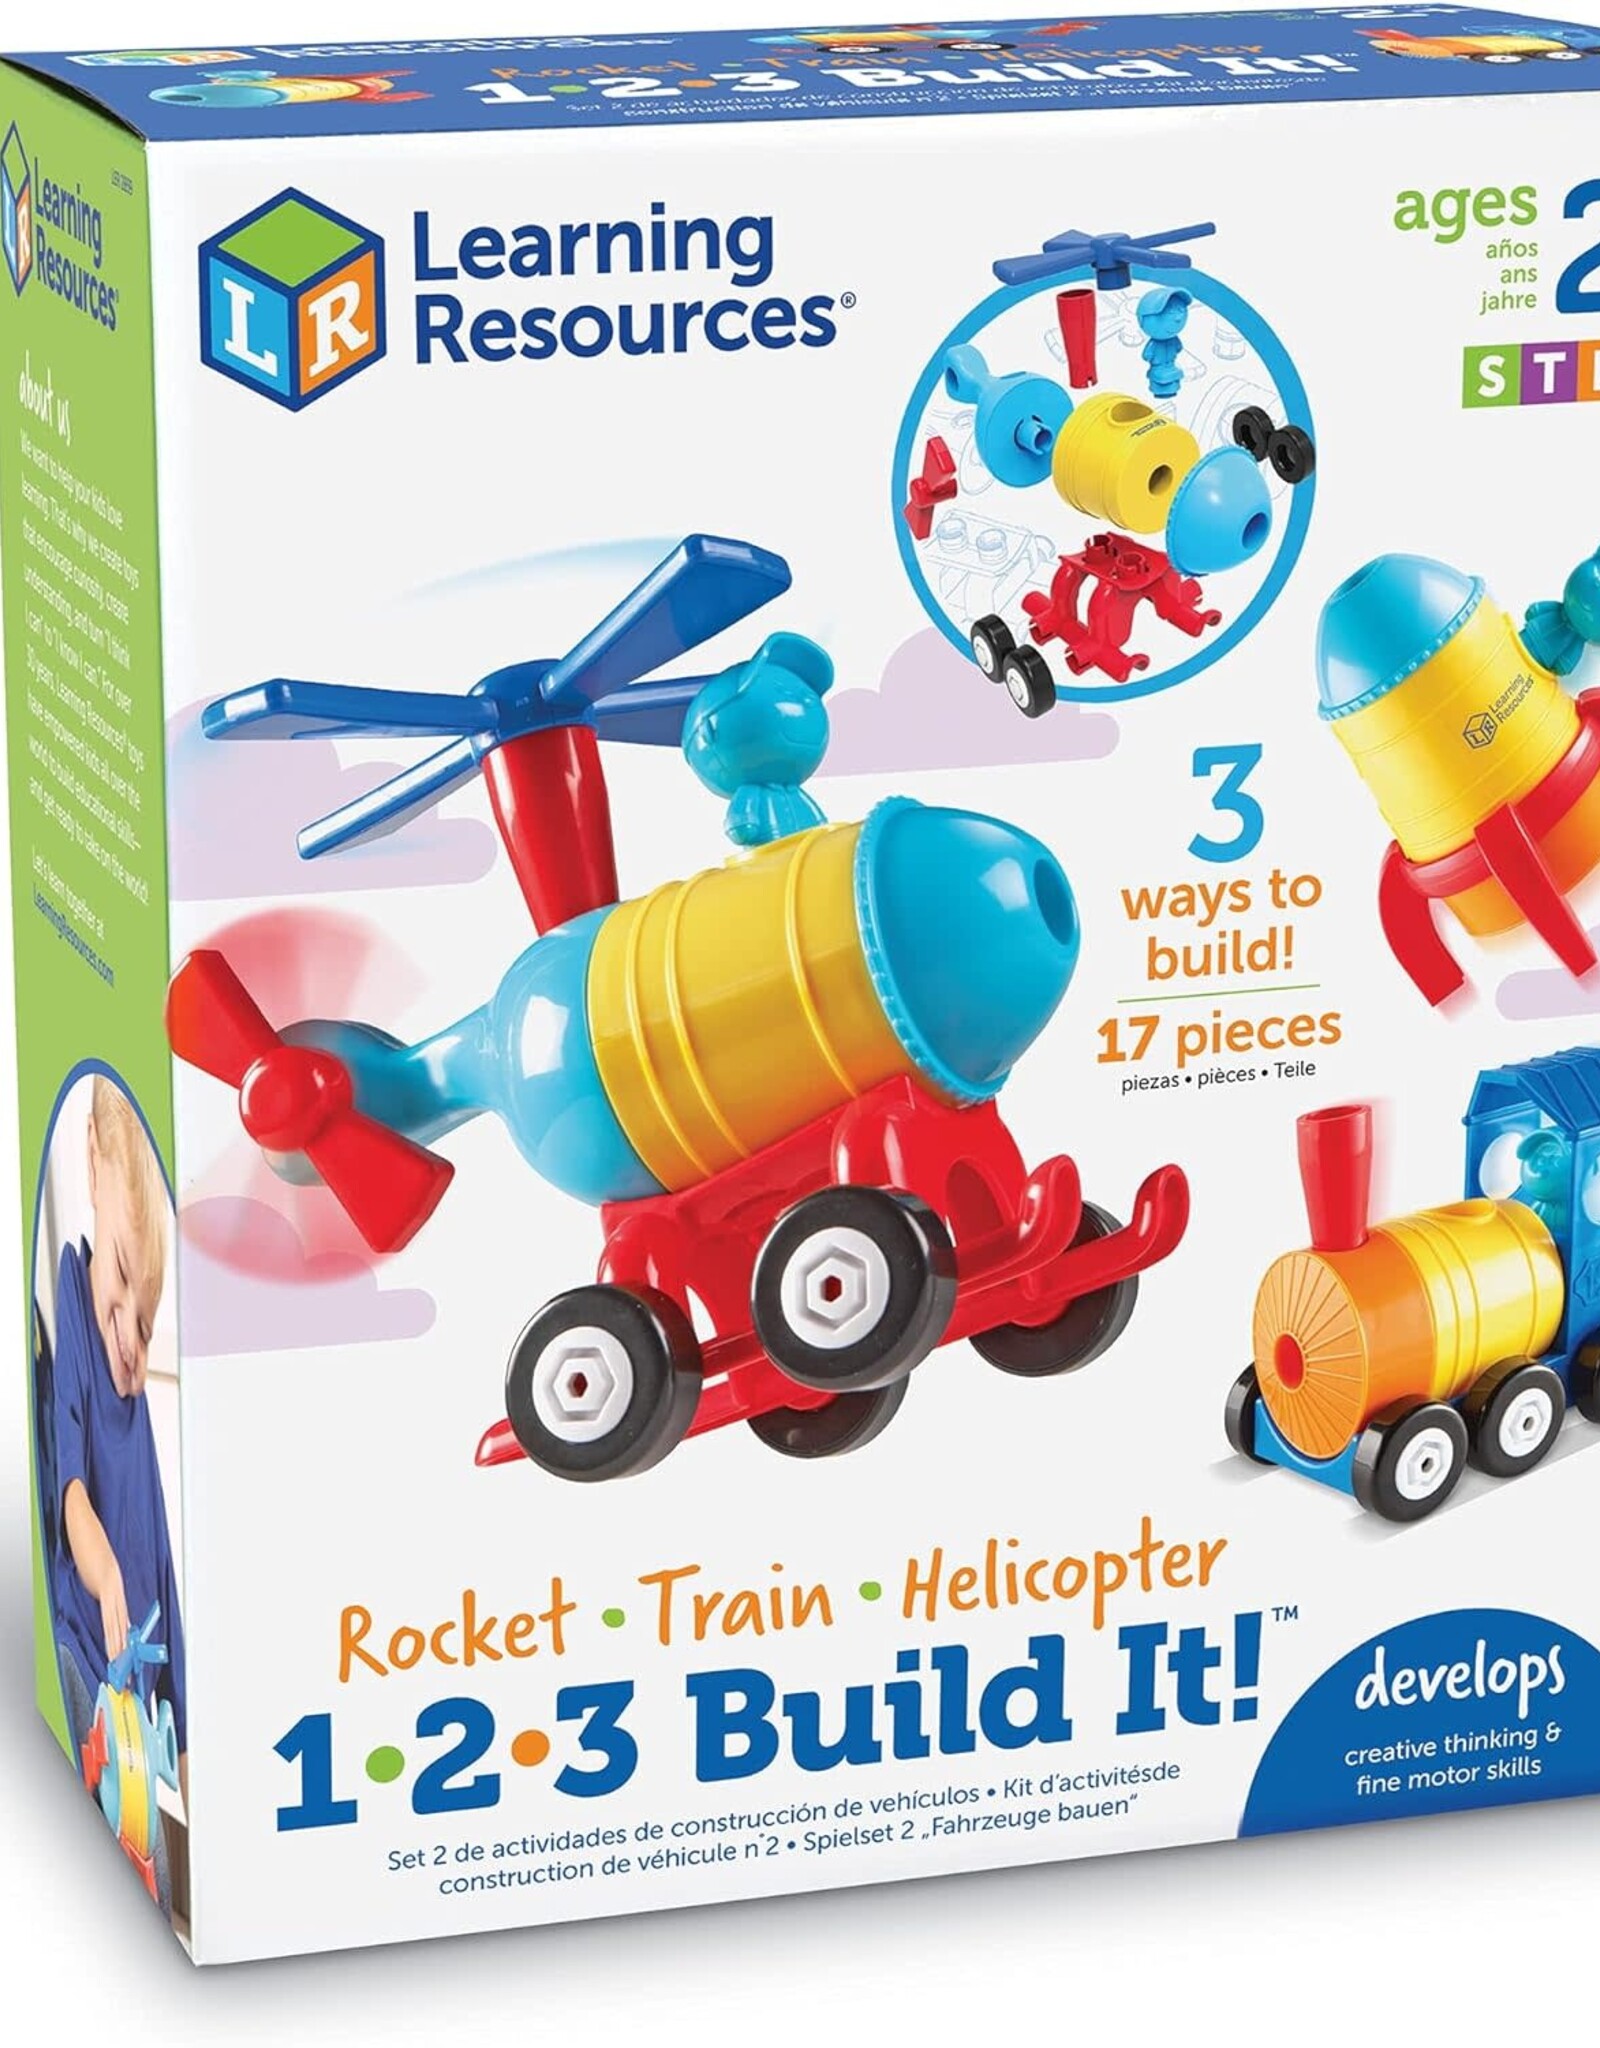 1-2-3 Build it! Train/Rocket/Helicopter